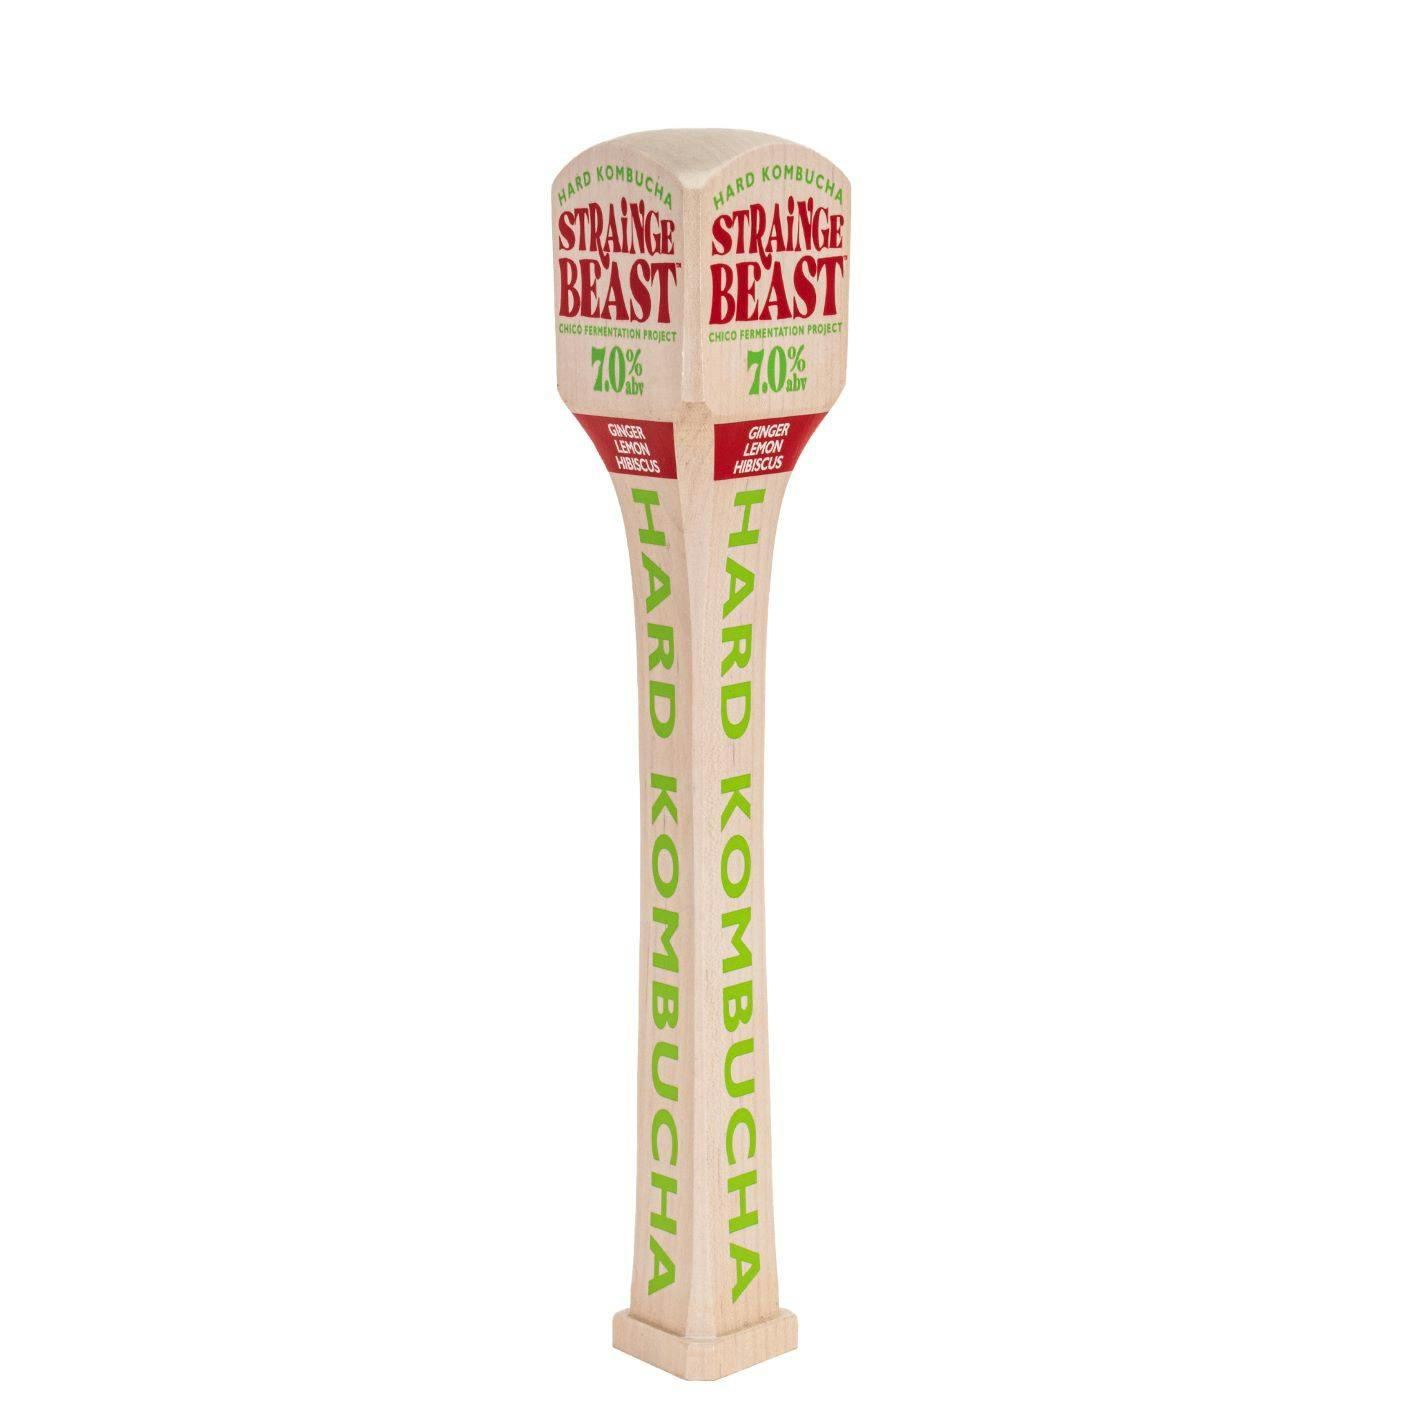 Sierra Nevada Brewing Co. Strainge Beast tap handle - an angled full view of the tap handle